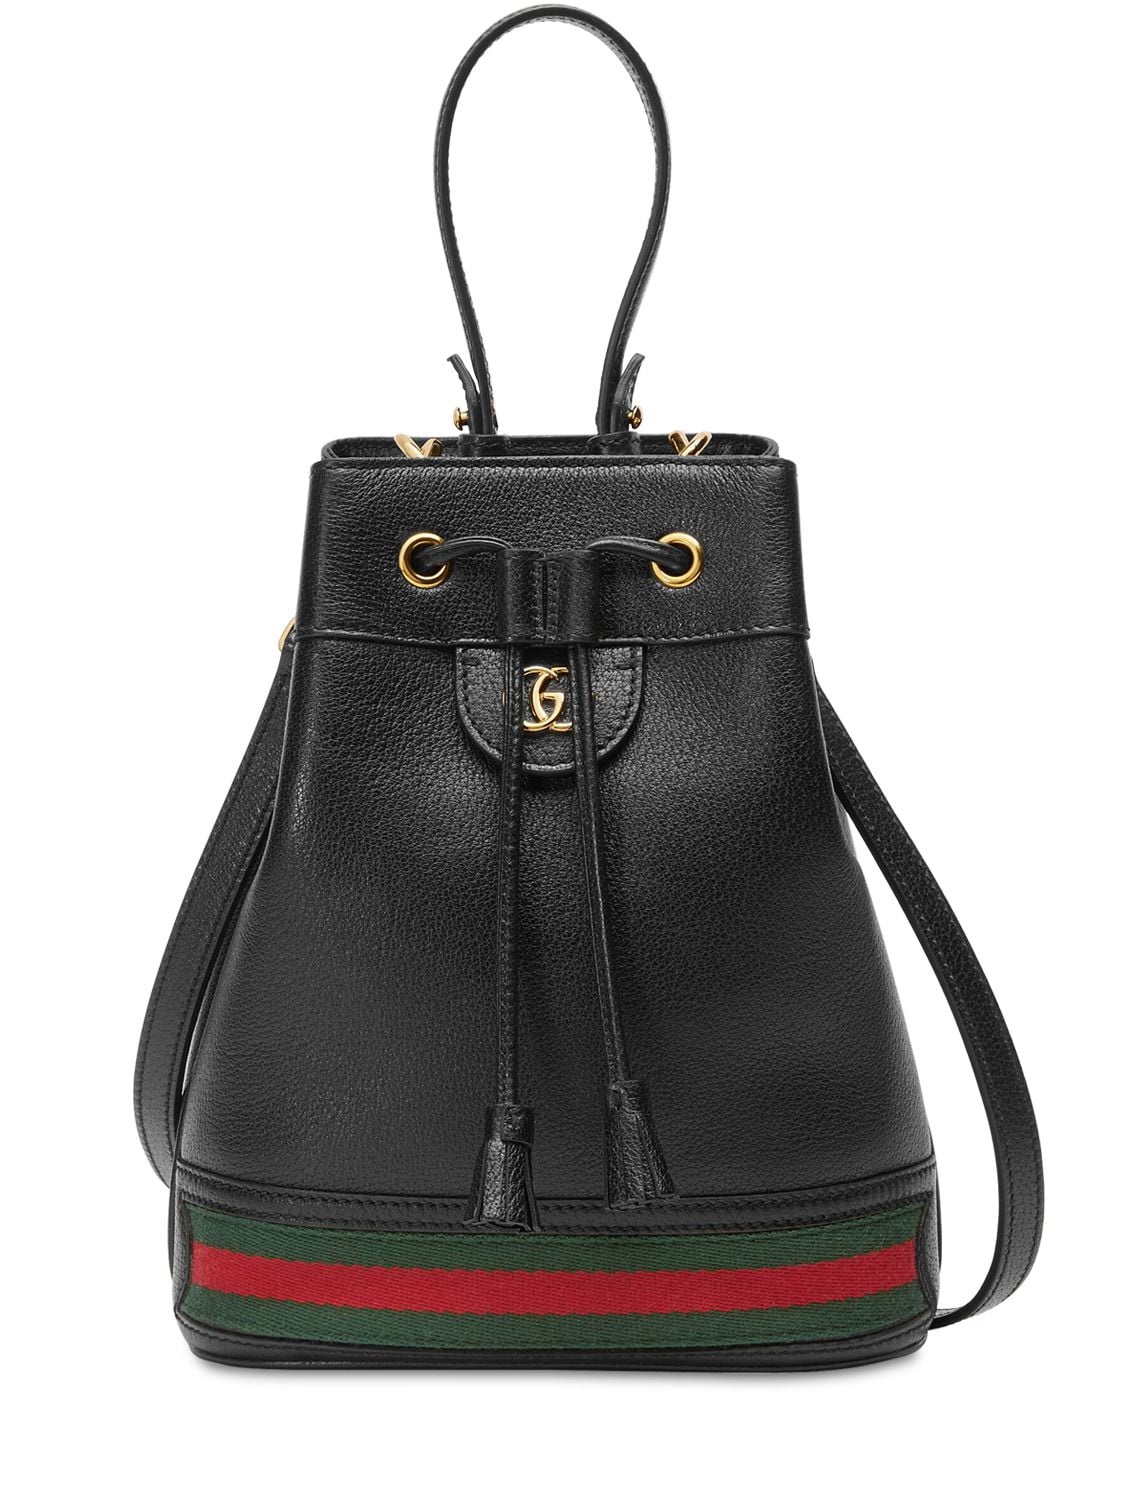 Gucci Ophidia Leather Bucket Bag In Black